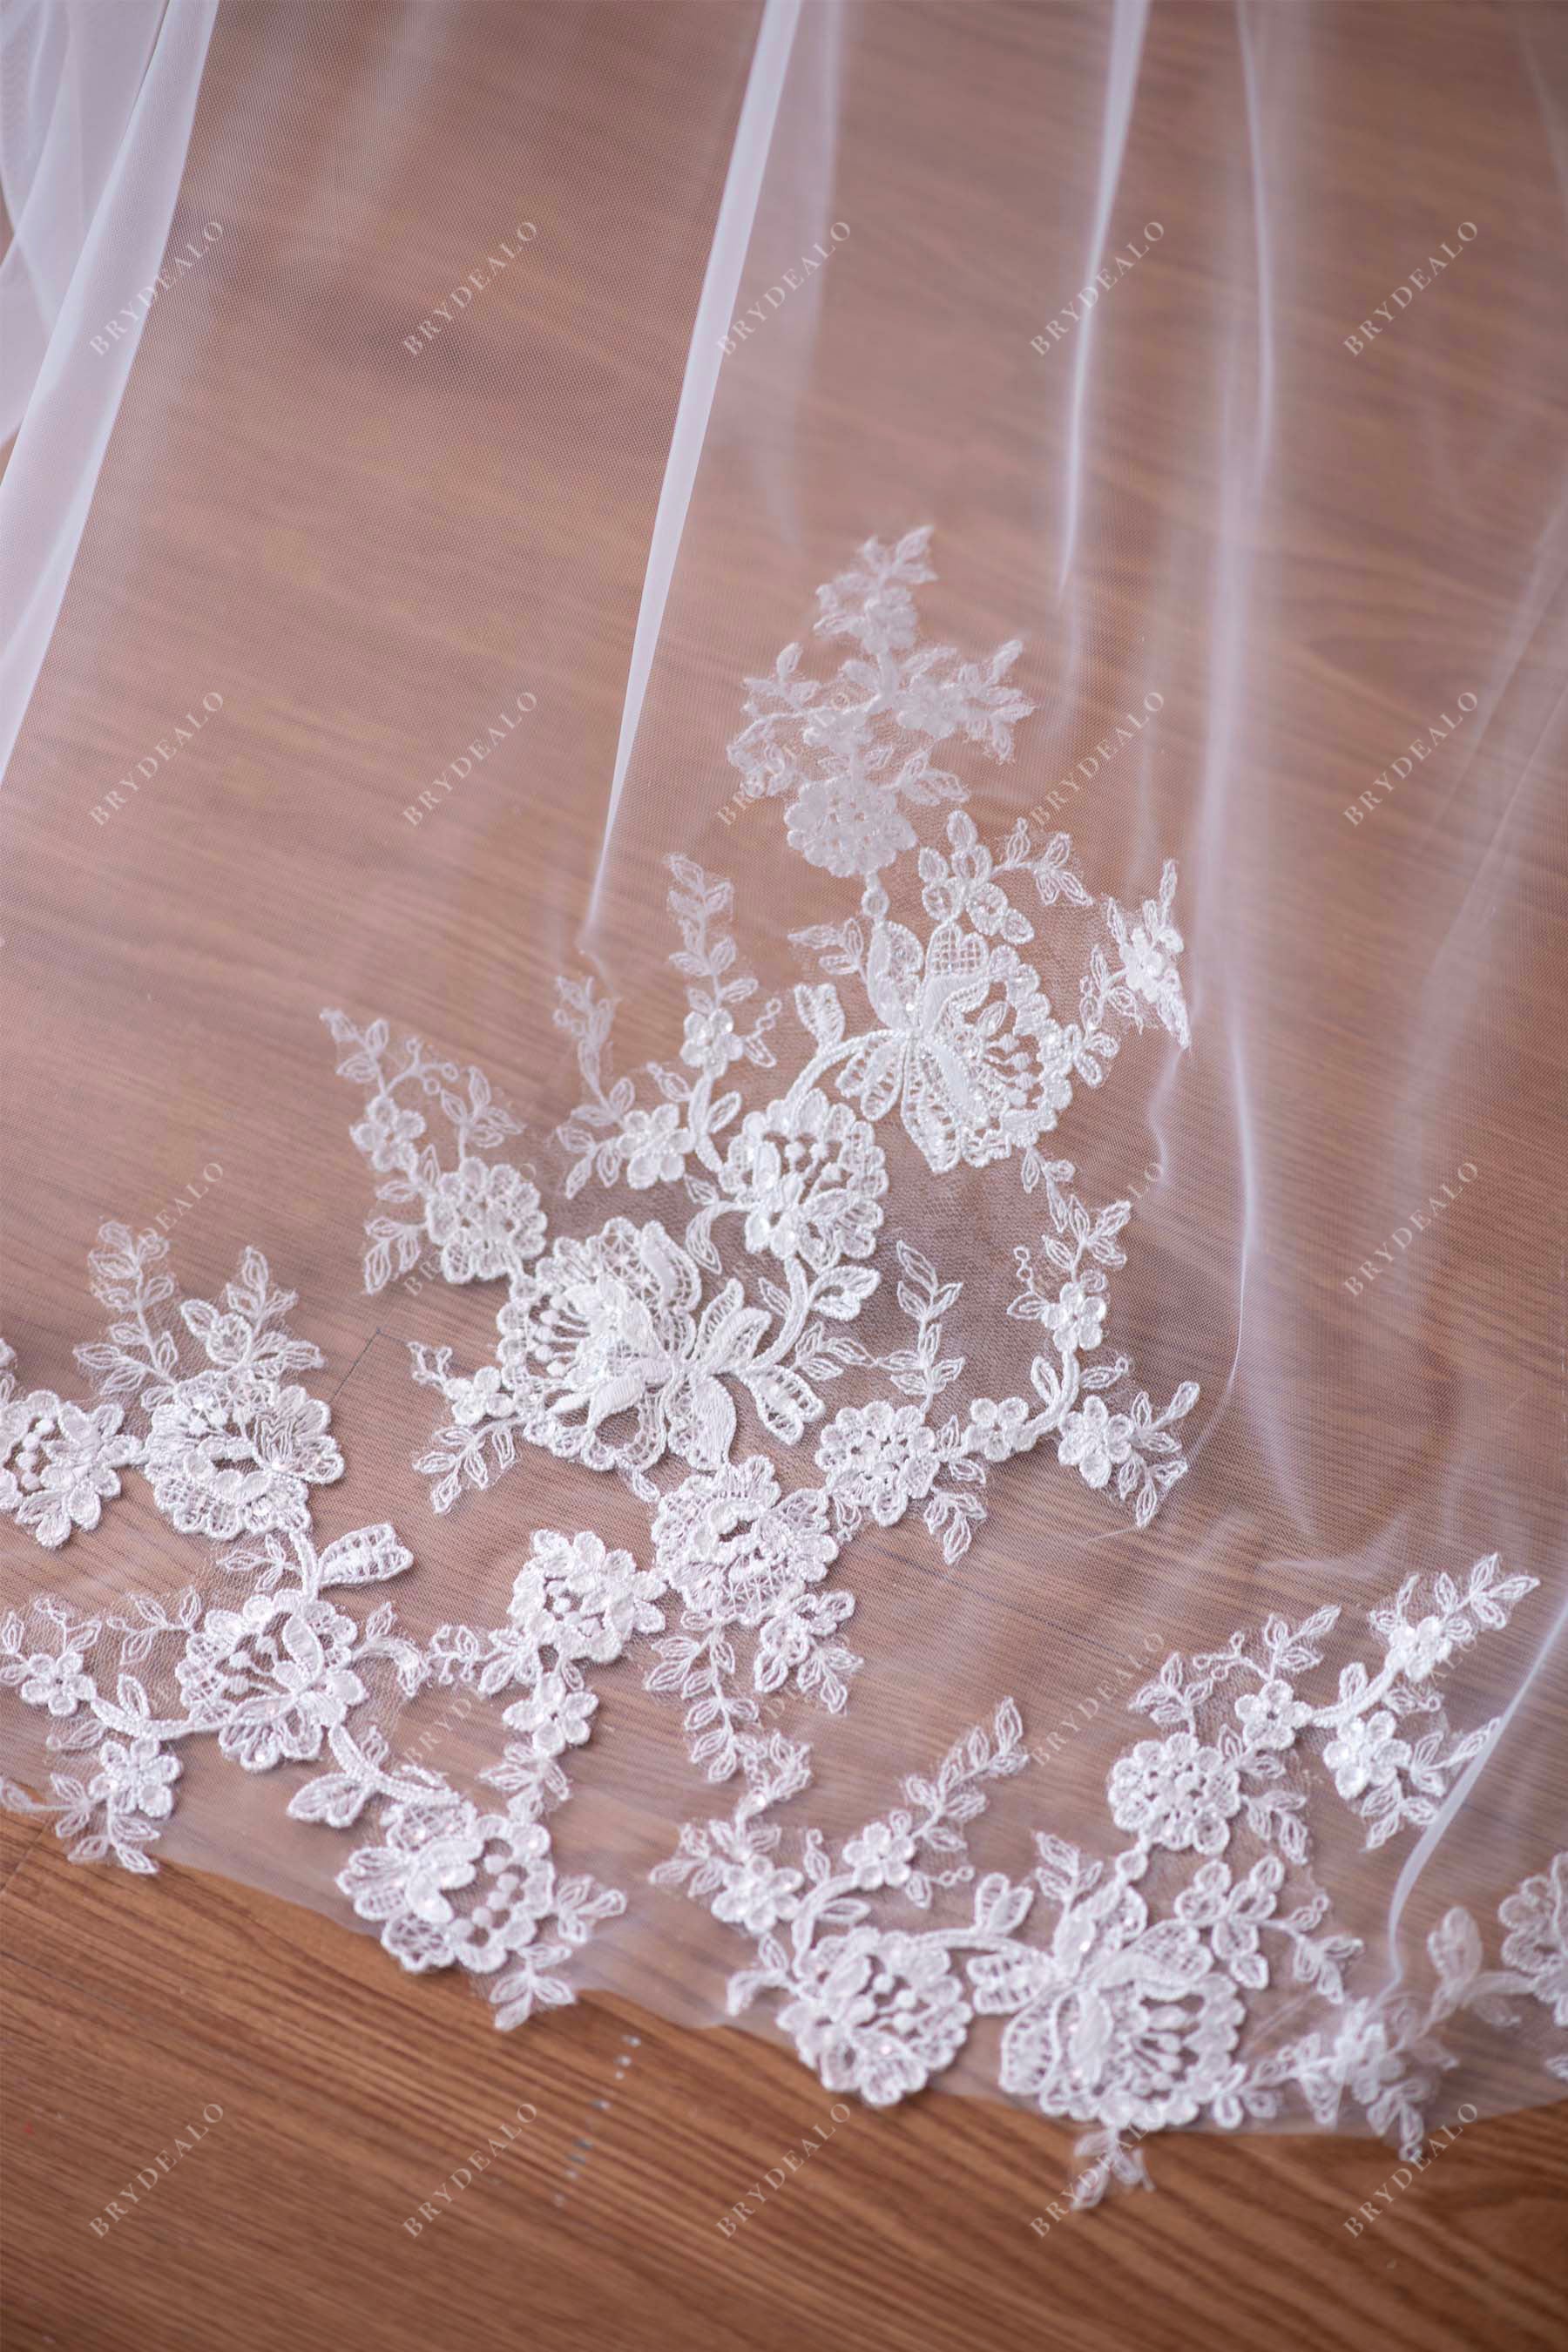 shimmery flower lace veil